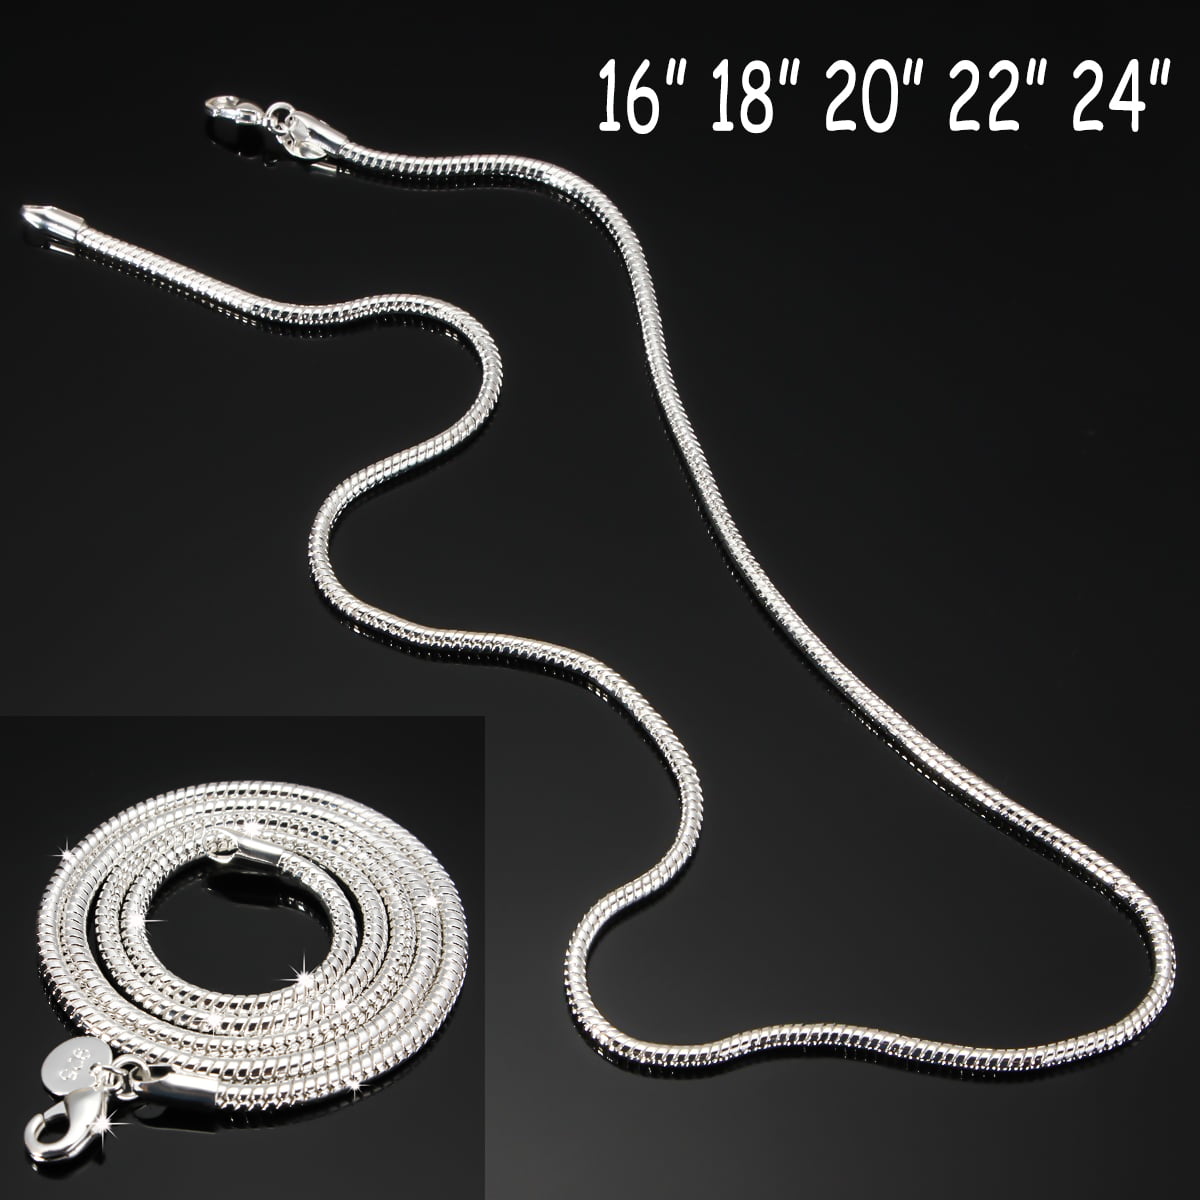 Metal Unisex Solid Silver 6mm Vivid Snake Chain Necklace Jewelry 16-24 inches 